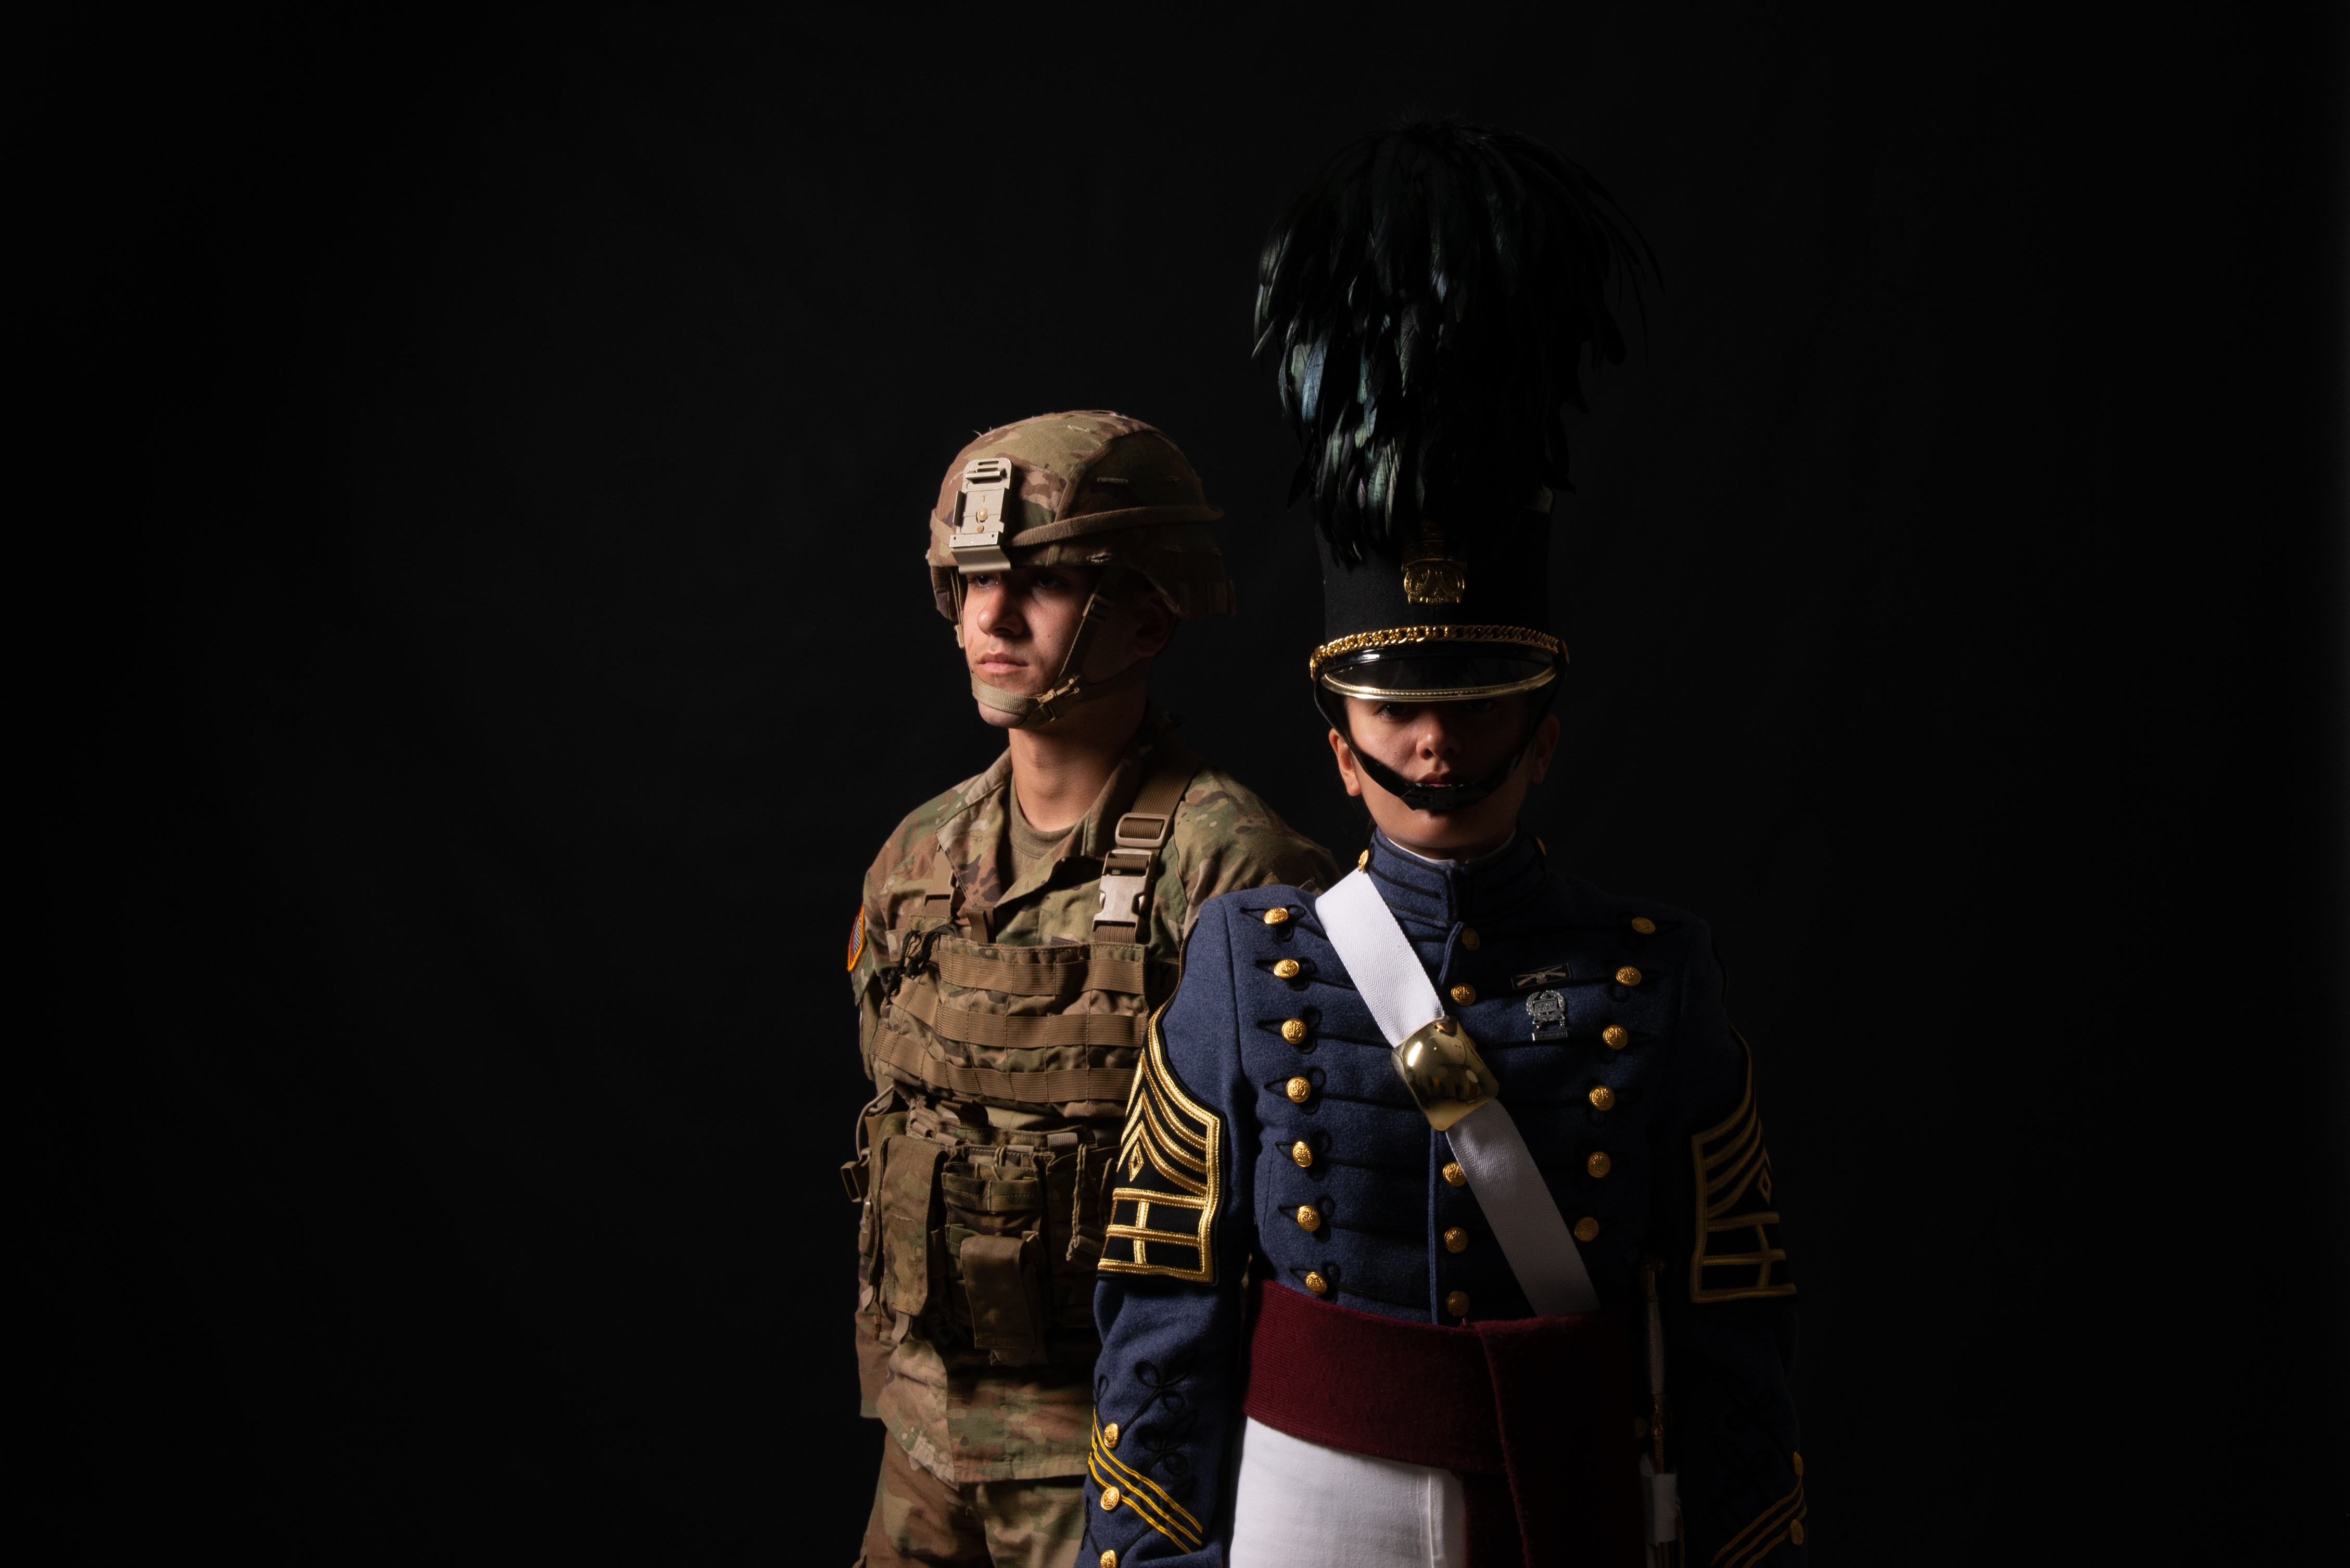 Cadets in dress uniform and battle ready gear